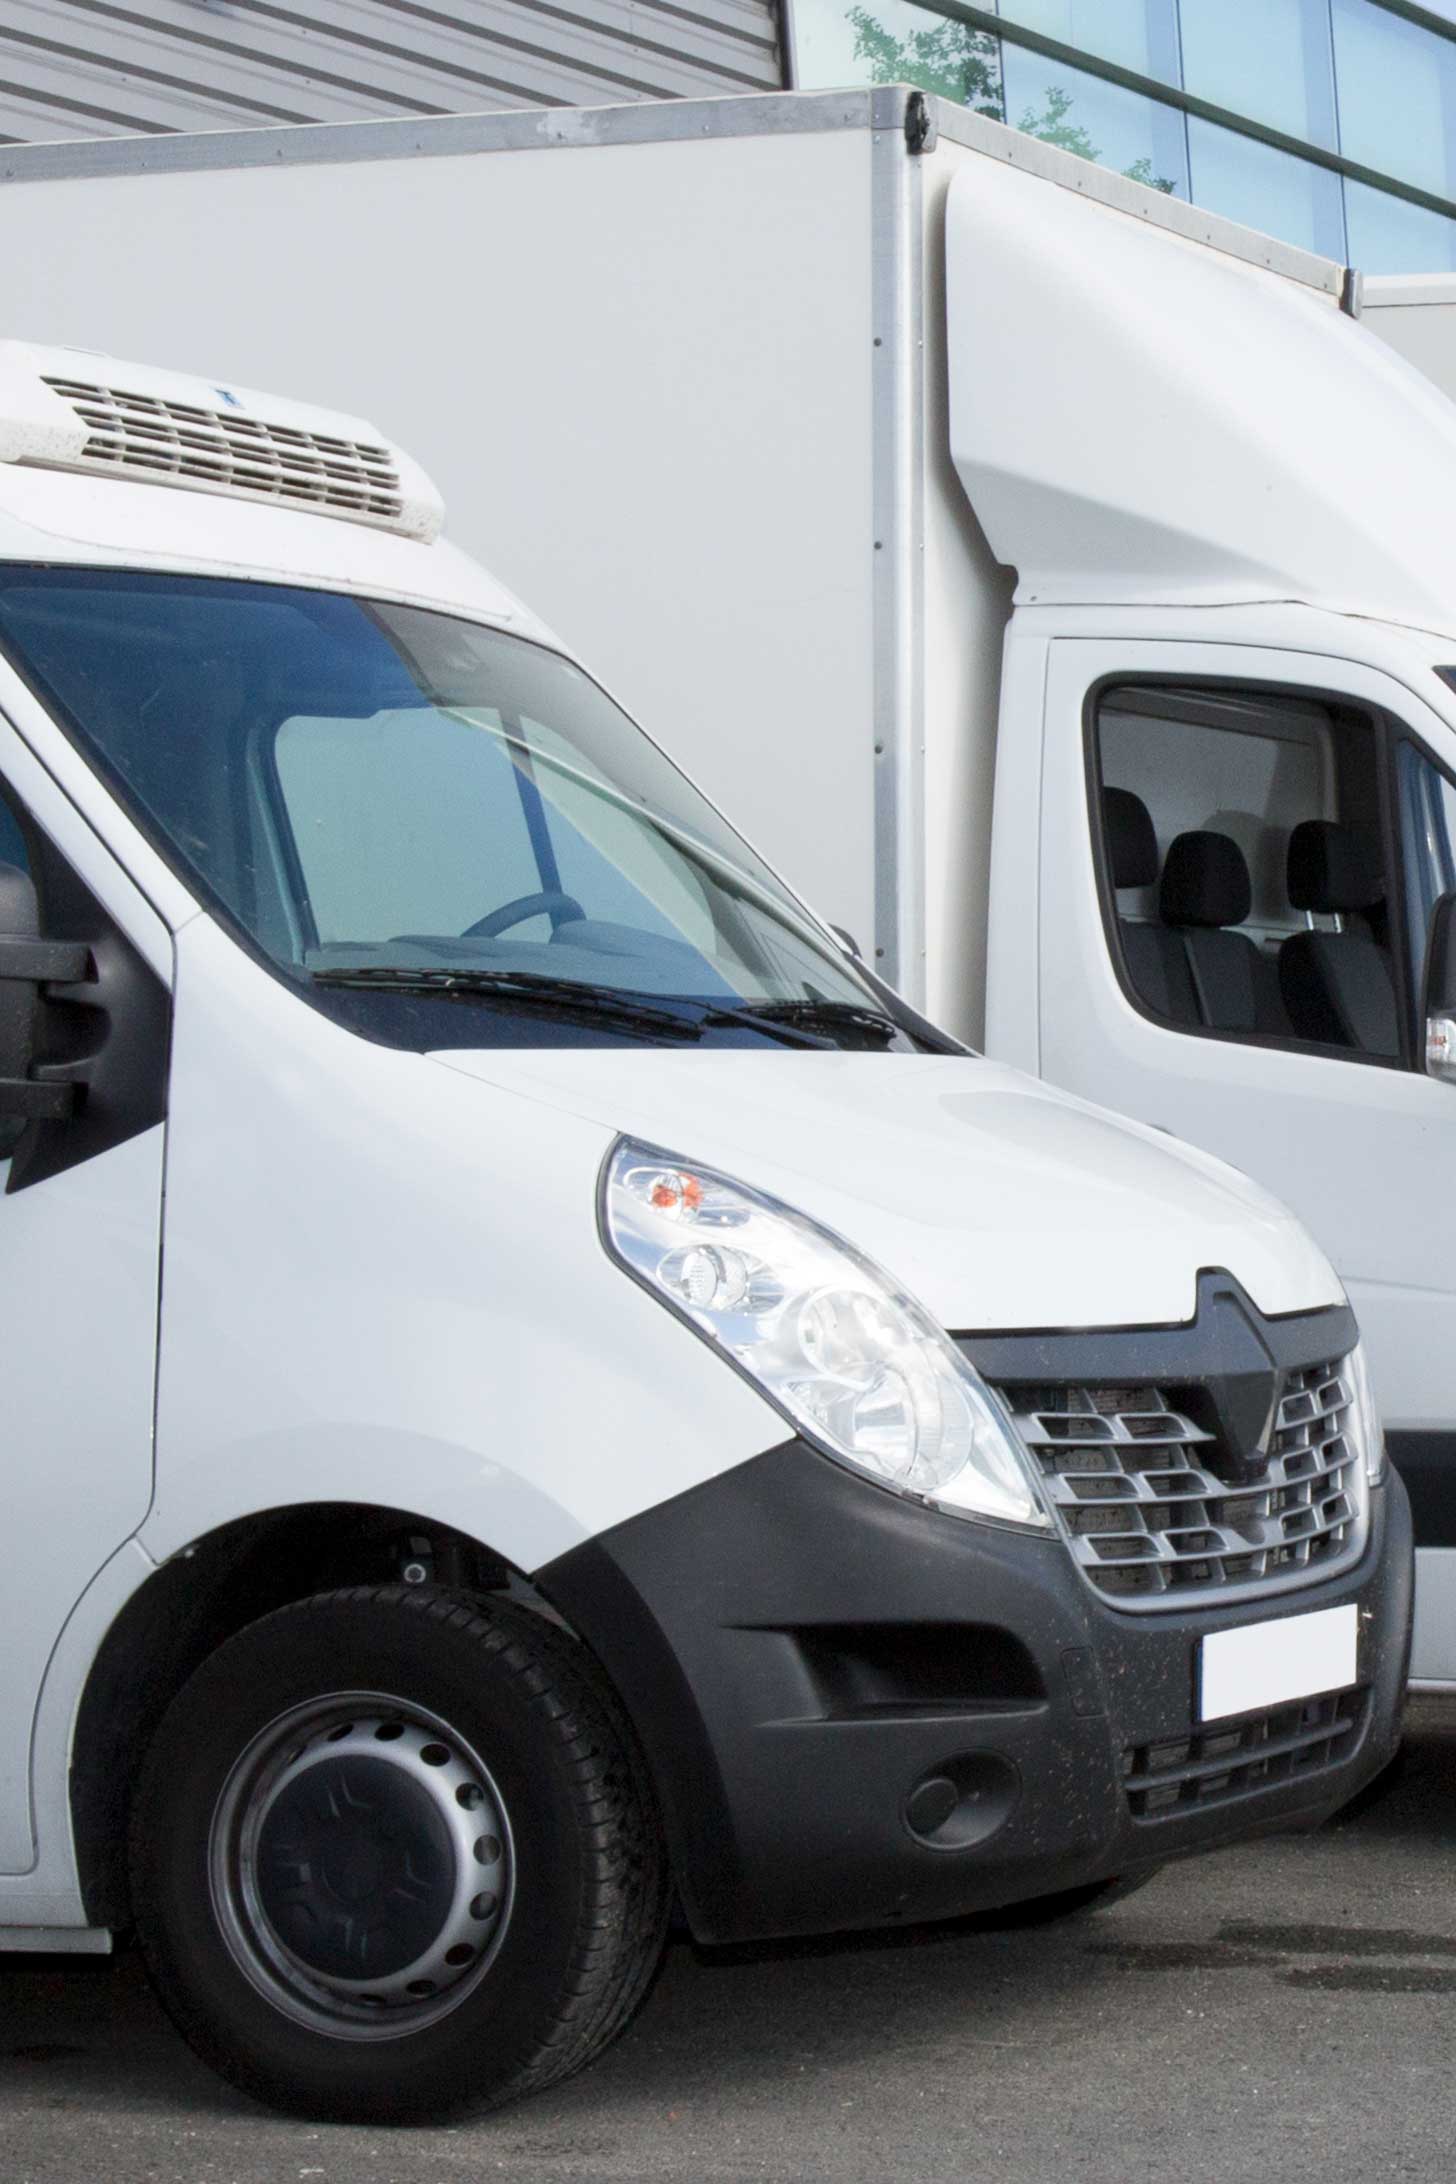 Searching for Van Hire in Kildare?